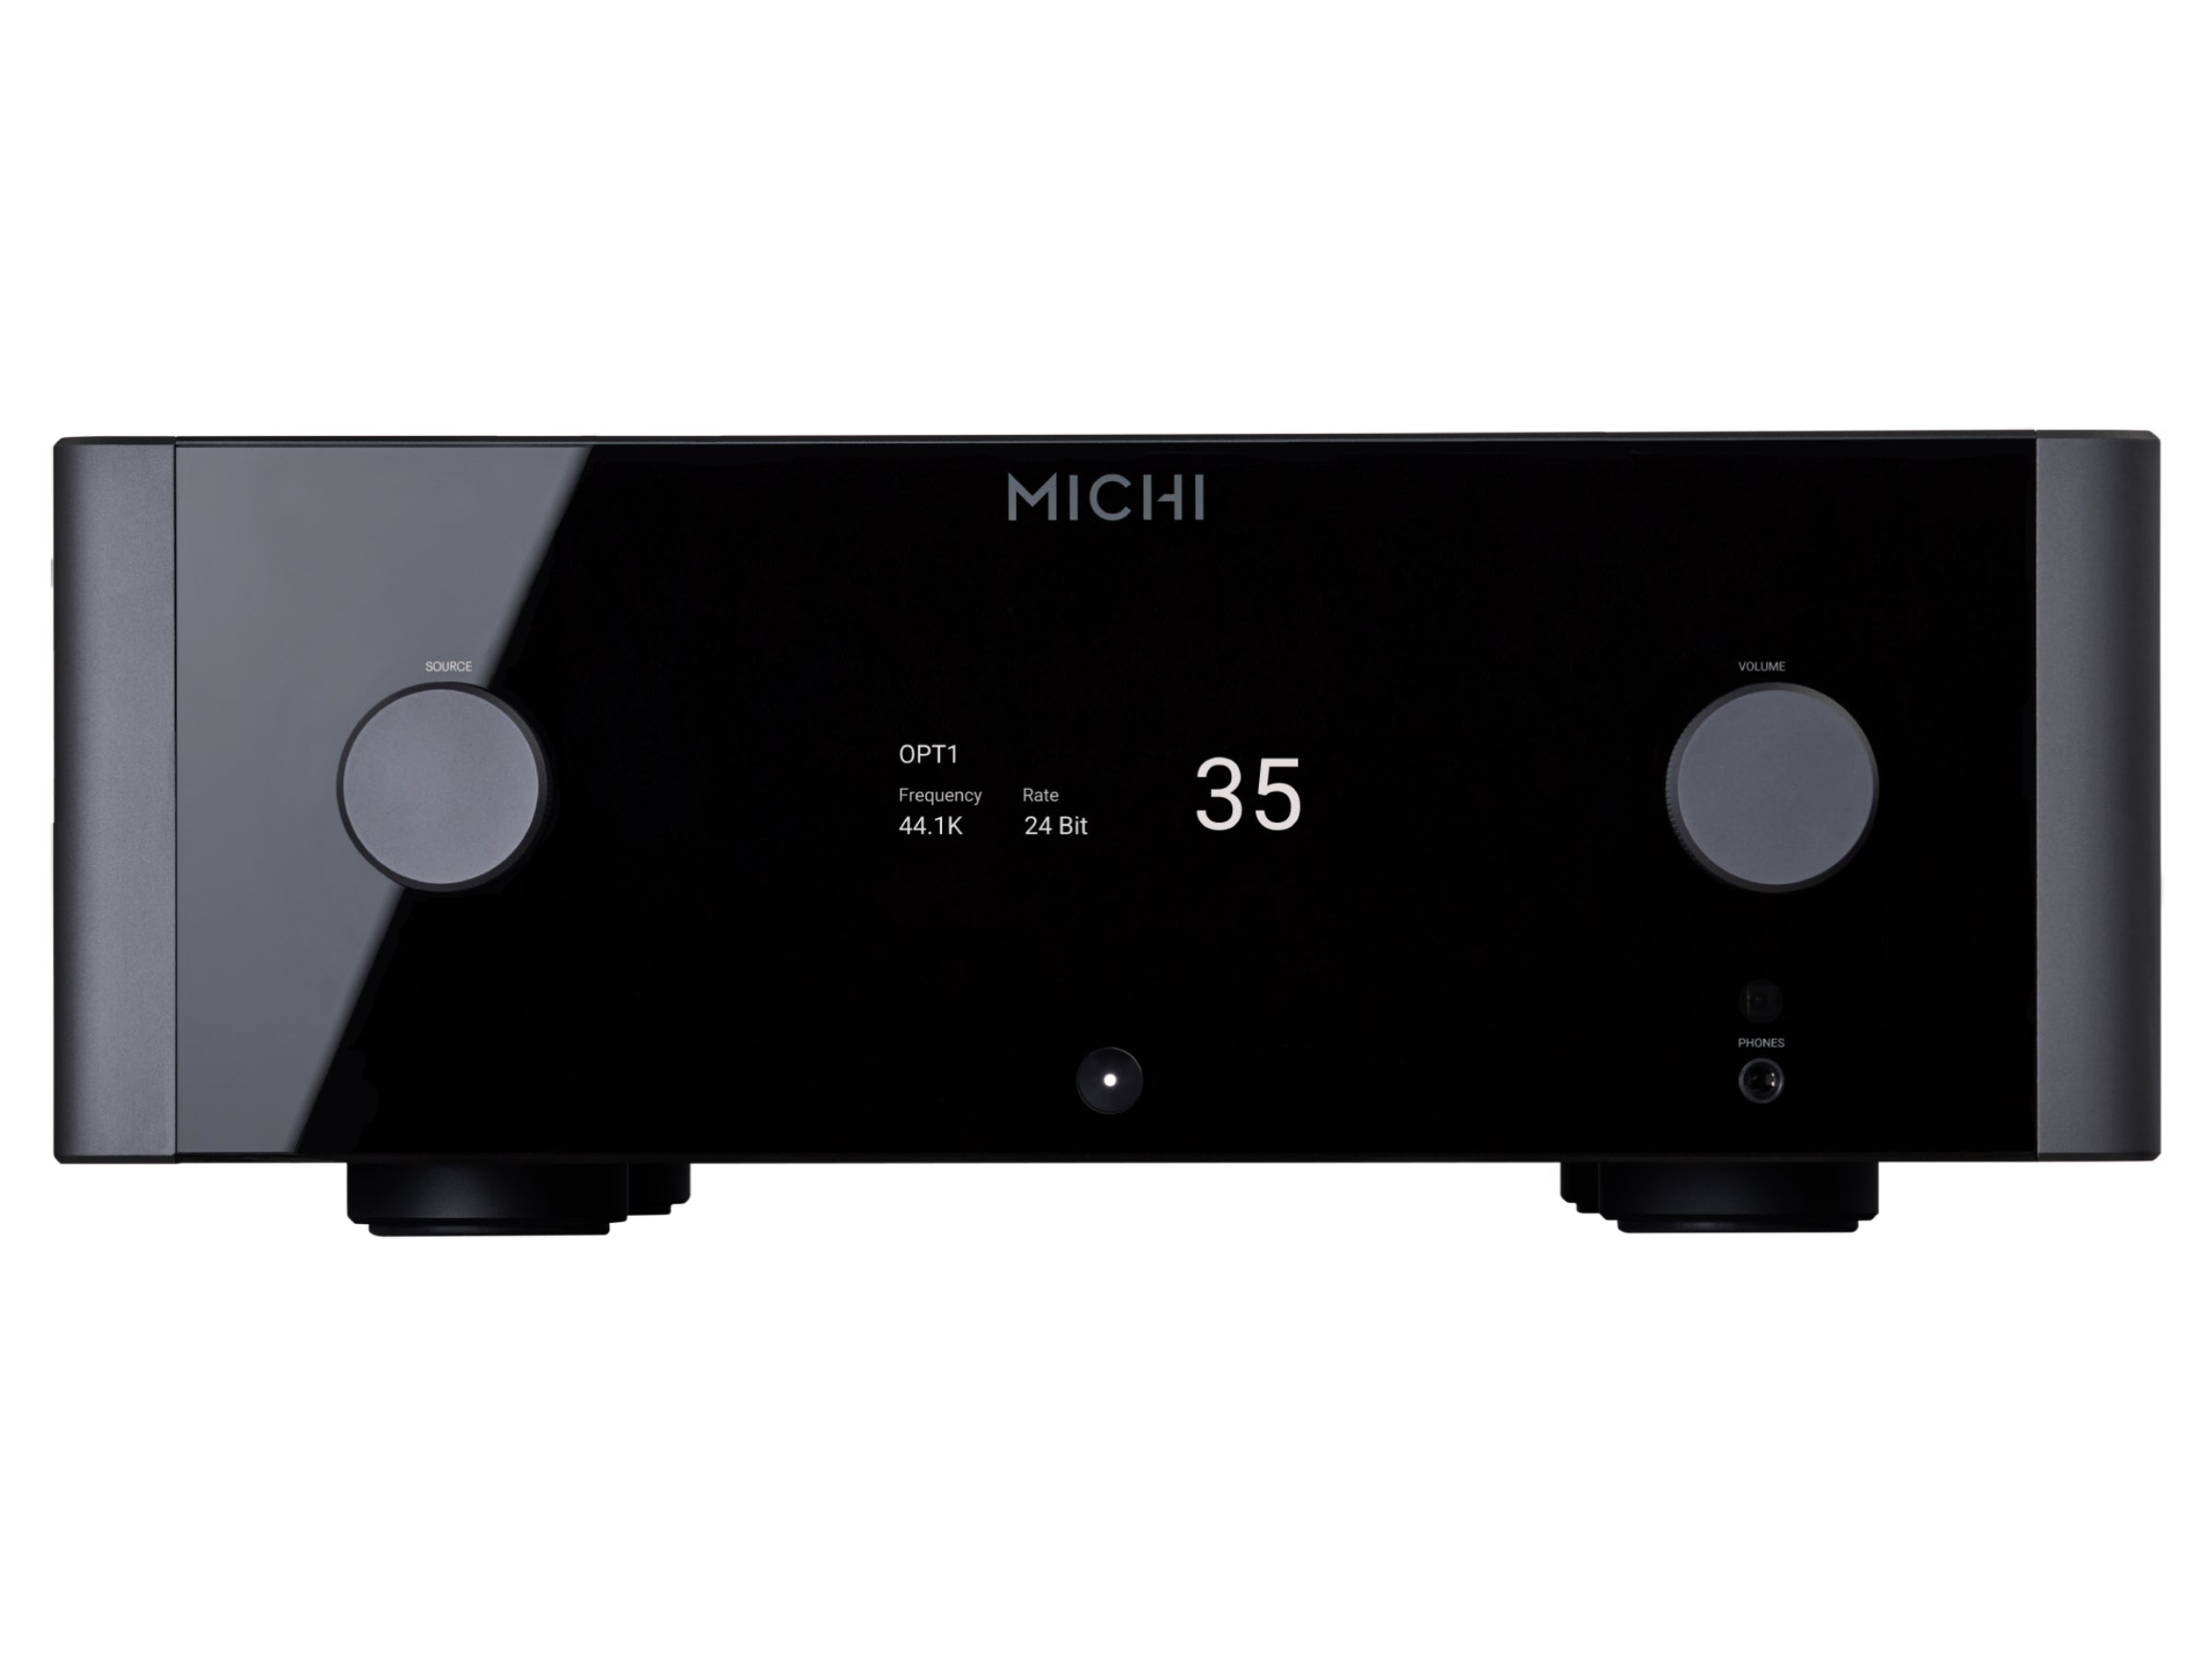 Rotel MICHI X5 Series 2 Integrated Amplifier